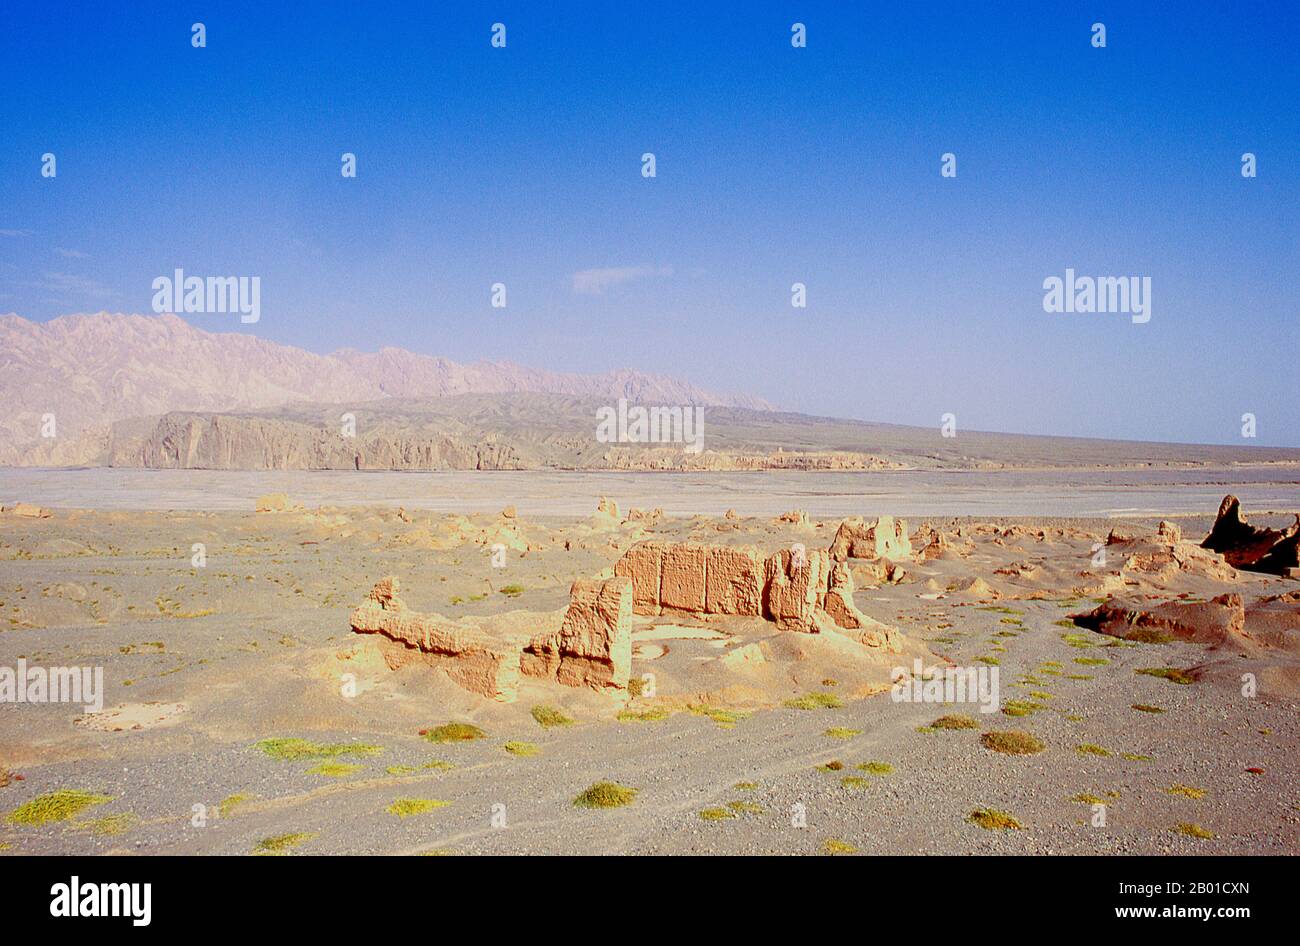 China: Subashi Ancient City (Subashi Gucheng), Kuqa, Xinjiang Province.  The ruins of Subashi Gucheng (Subashi Ancient City) are all that is left of the ancient capital of the Kingdom of Qiuci that existed from the 4th century CE until it was abandoned sometime in the 12th century. Stock Photo